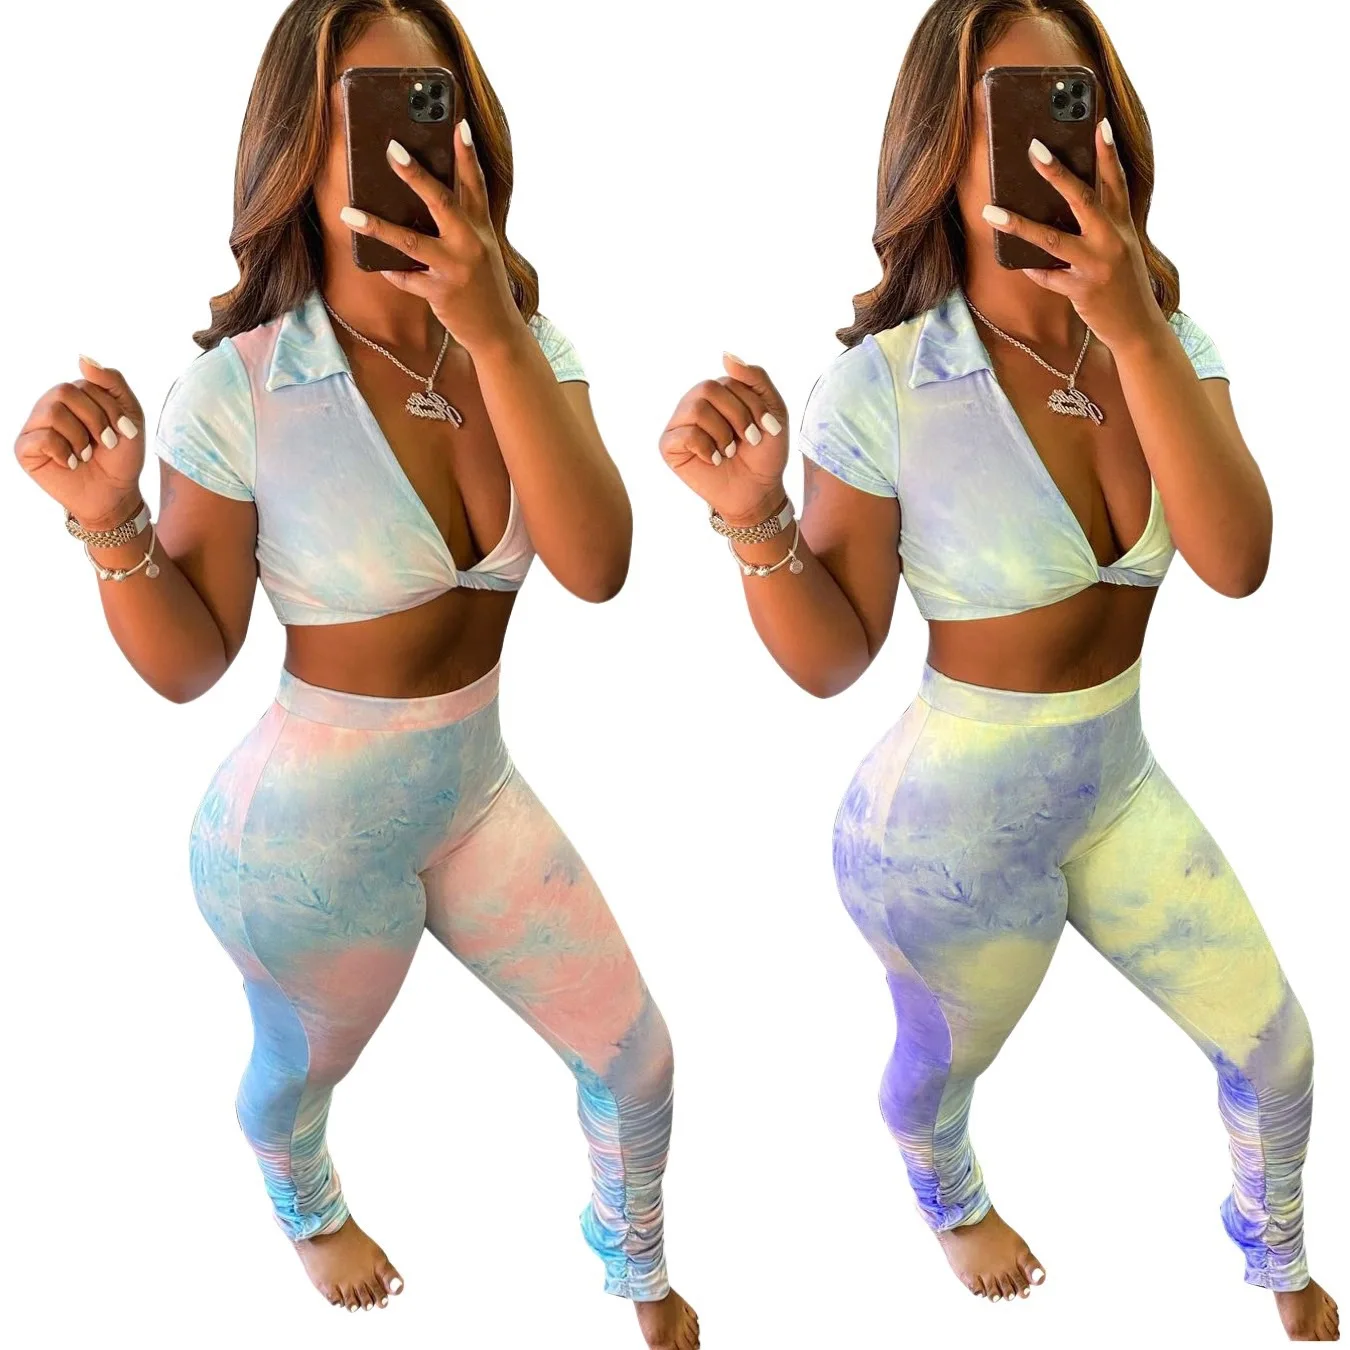 

Women Two Piec Set Tie Dye Print Set Summer Casual Sportswear Twist V Neck Crop Top + Stacked Pants Sexy Outfit Jogging Femme